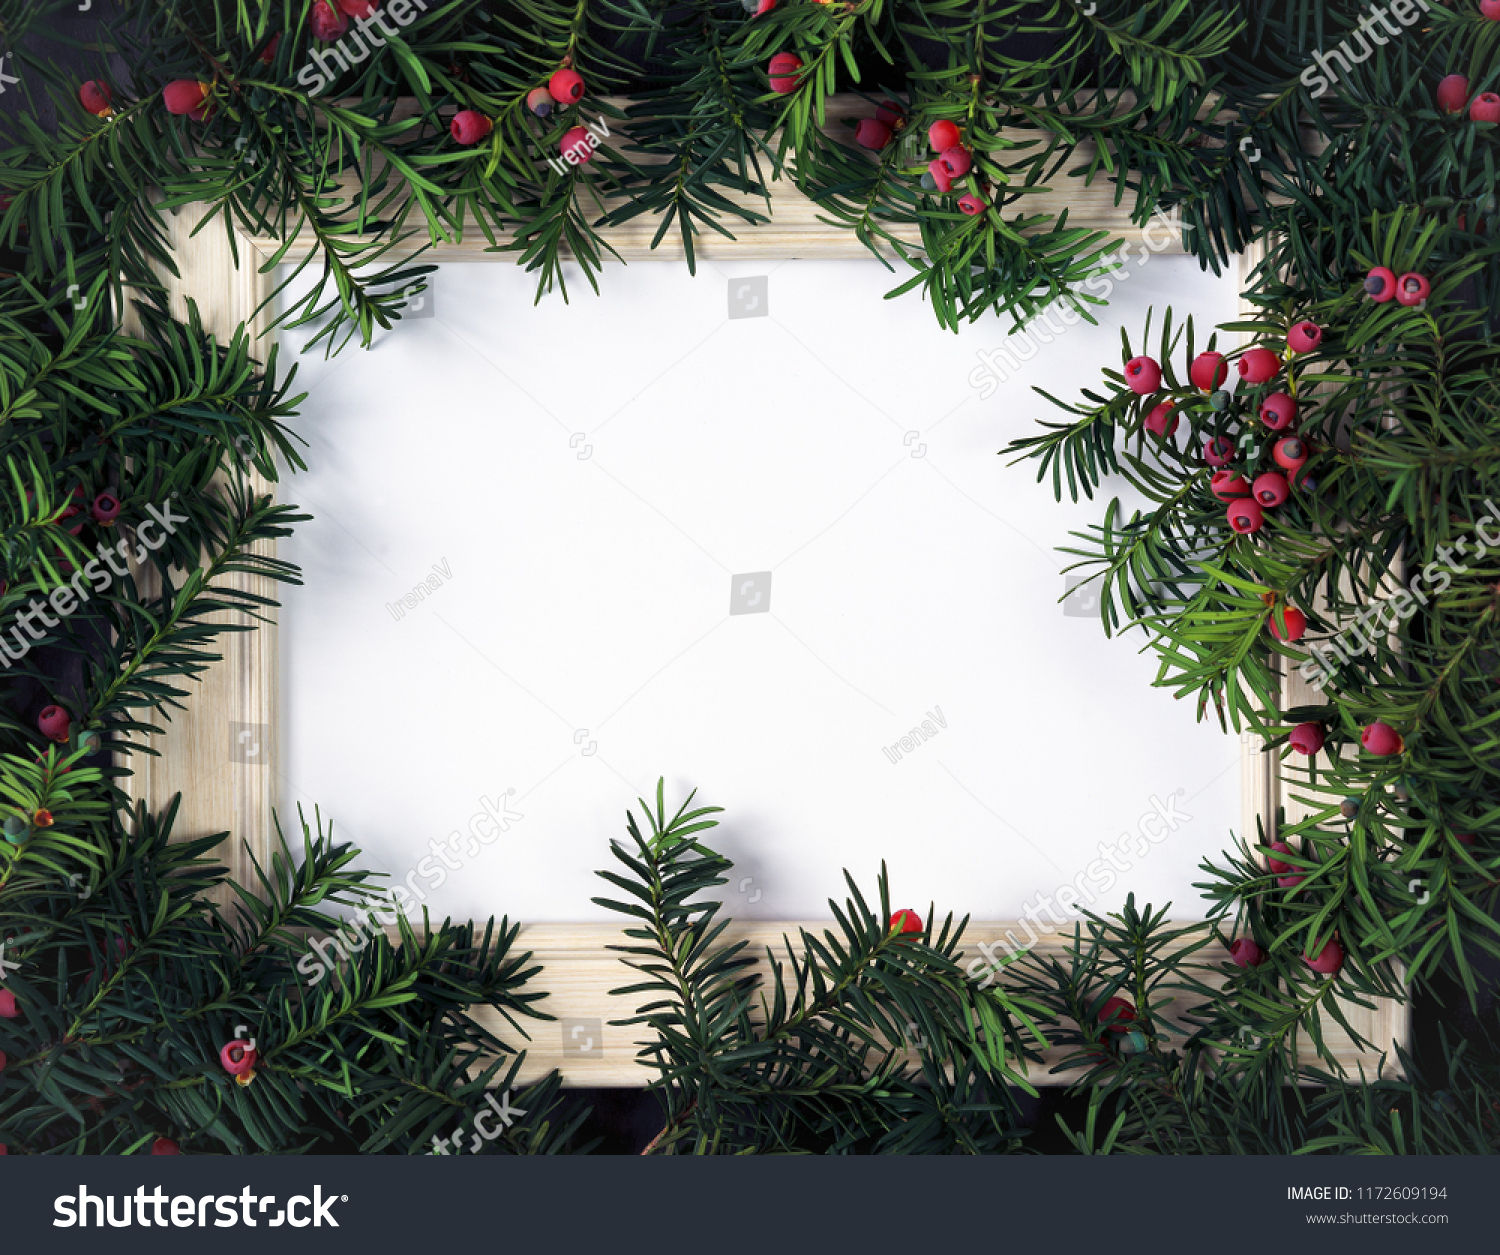 Creative layout made from Christmas tree branches with red berries and frame paper card note. Copy space for text. Nature New Year concept. Flat lay. #1172609194